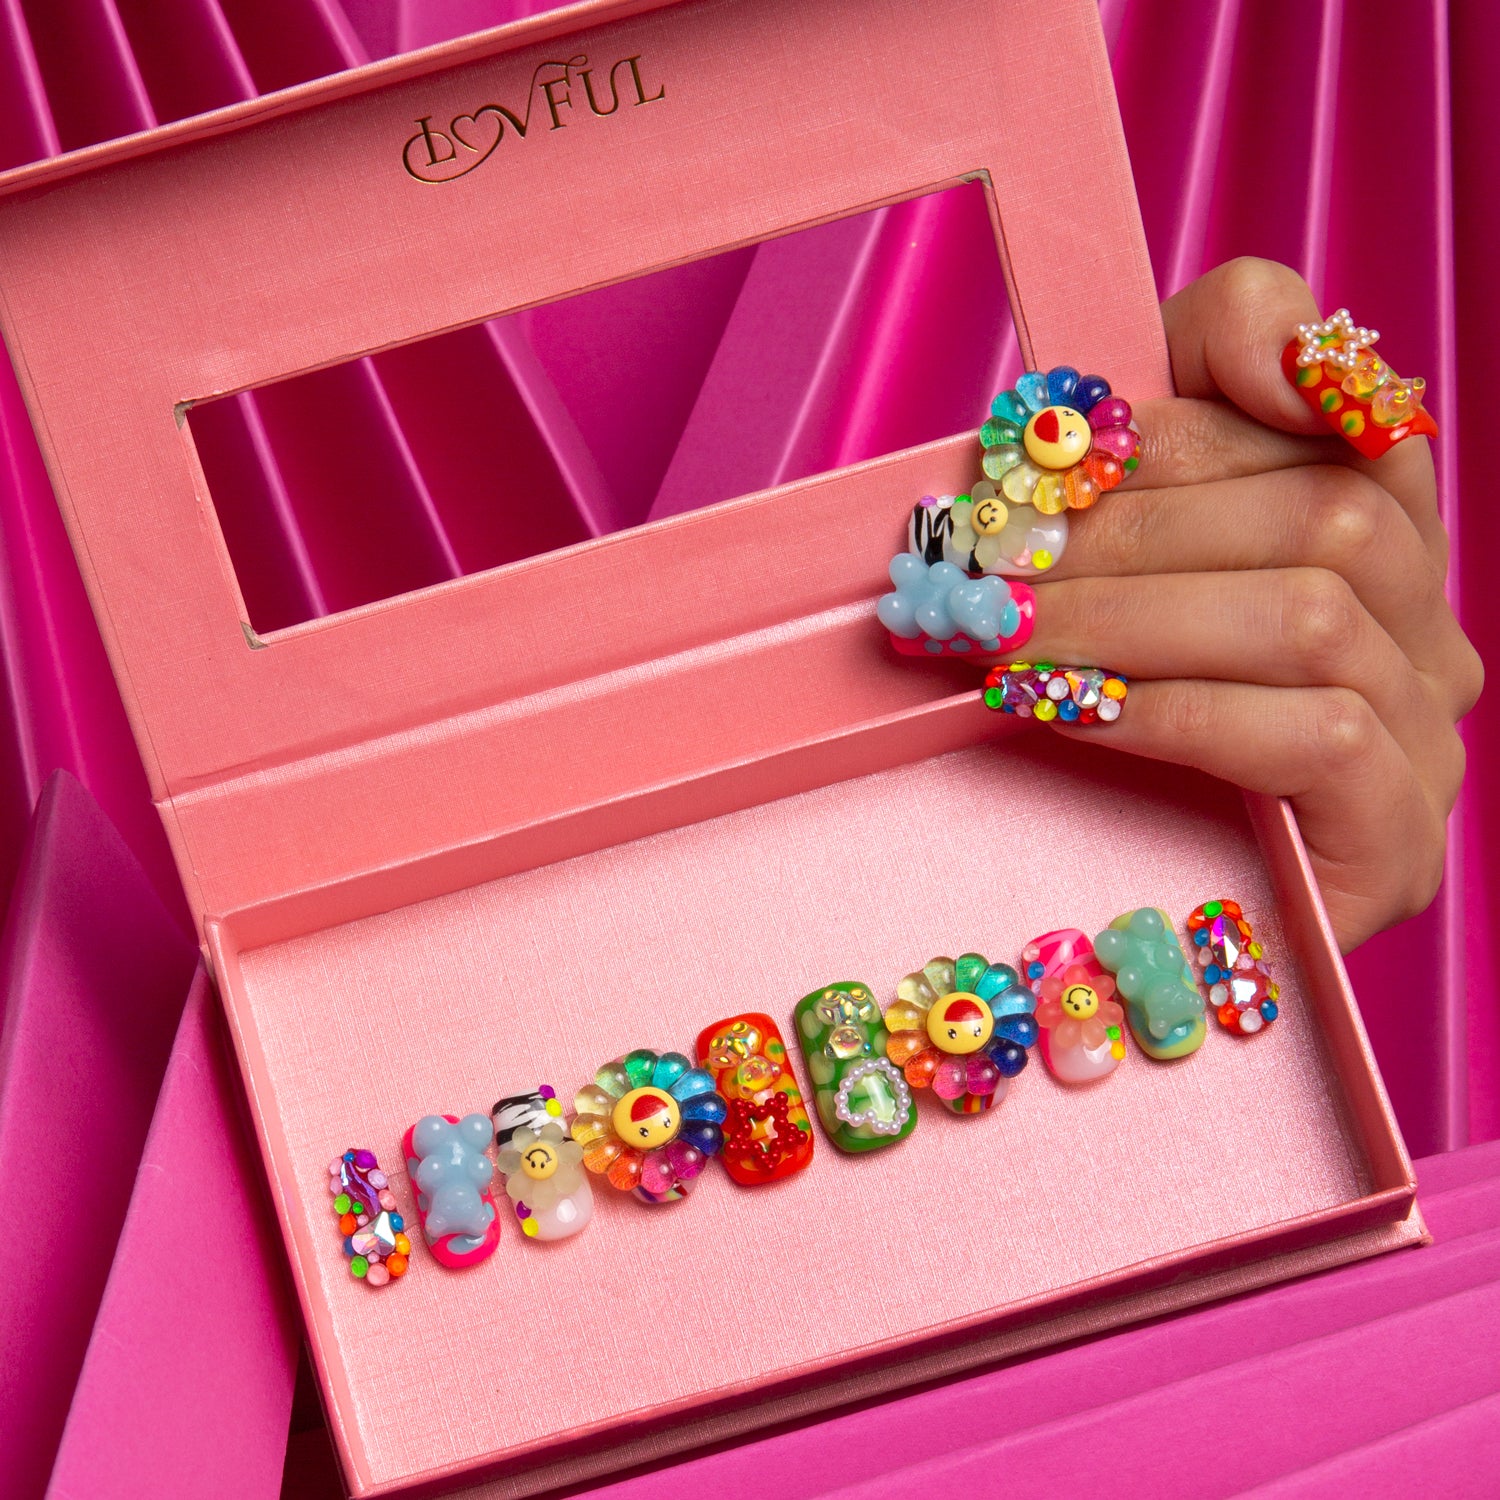 Lovkashi Blossom press-on nails adorned with a happy smiley face design